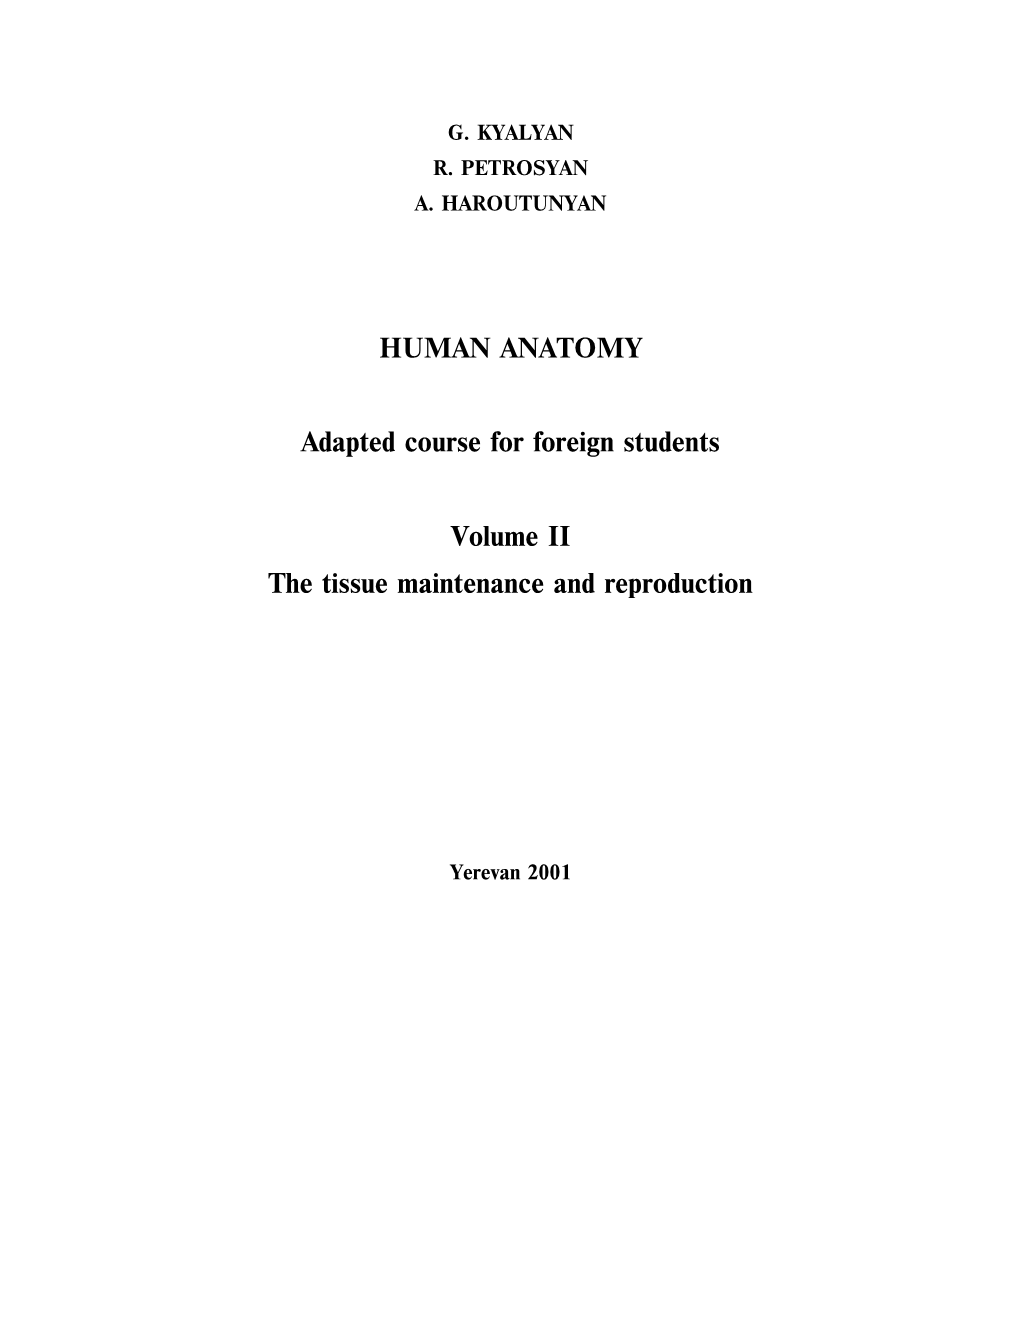 HUMAN ANATOMY Adapted Course for Foreign Students Volume II The